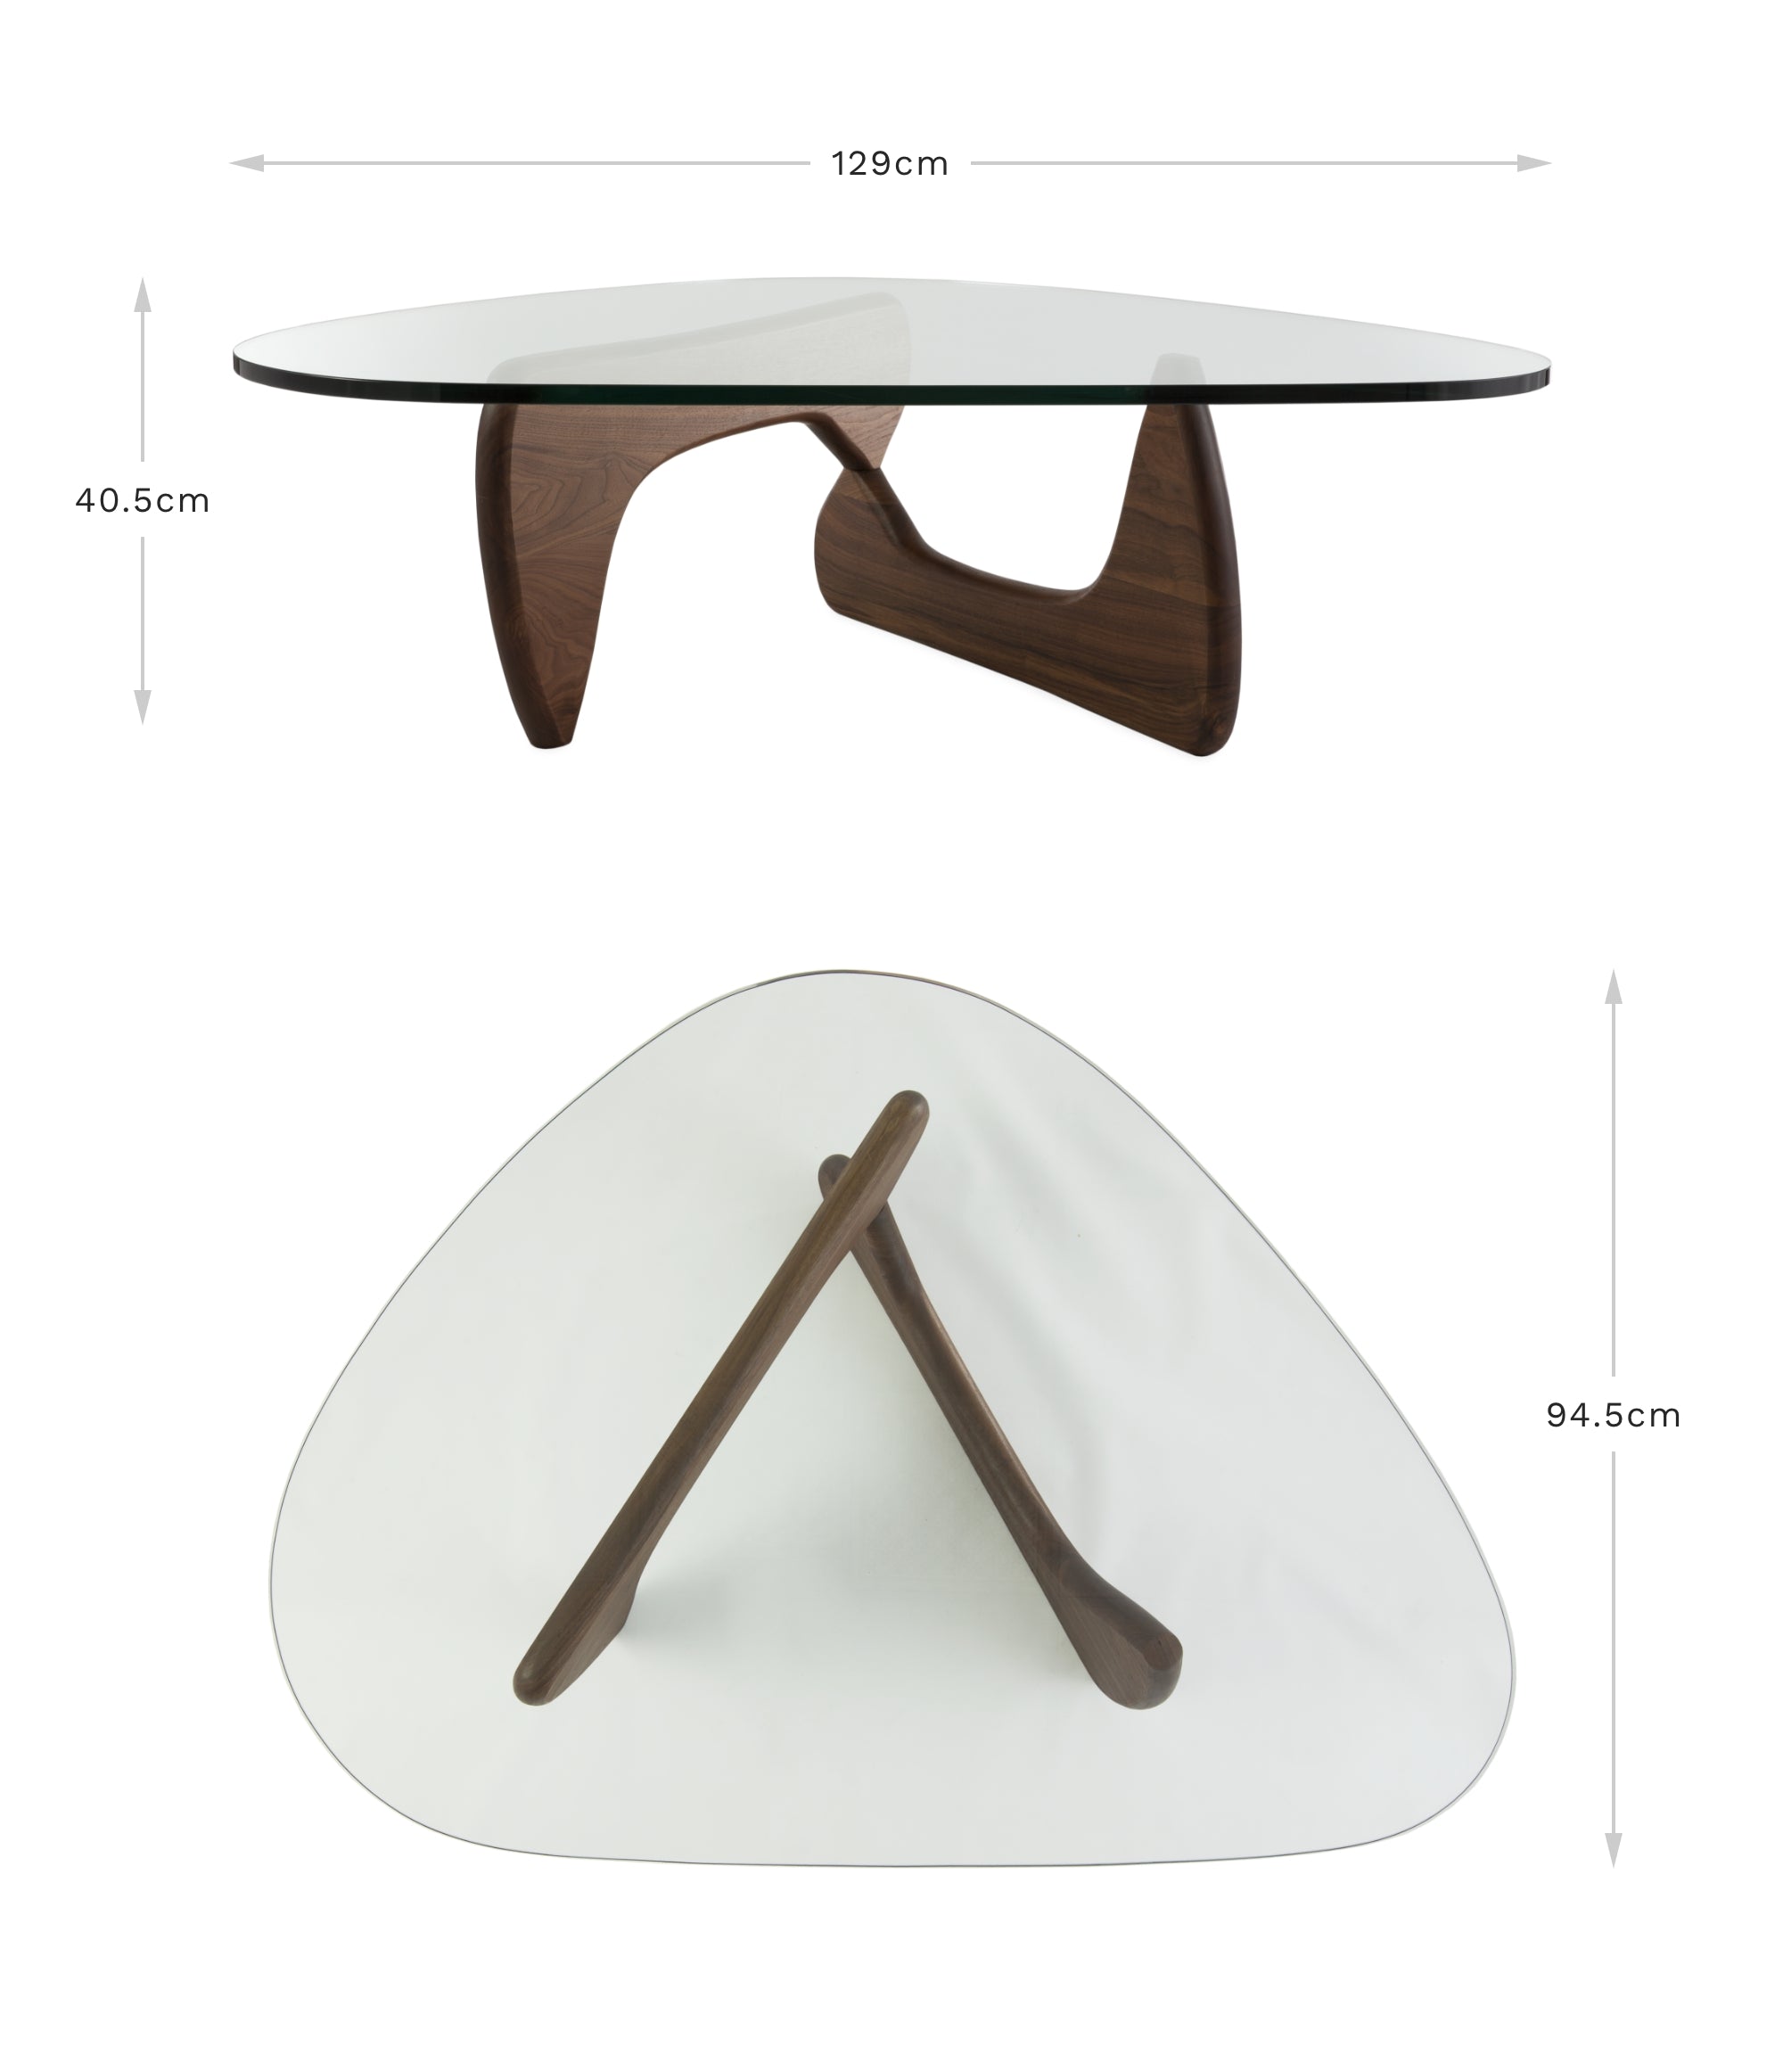 View of top and front of the walnut Noguchi coffee table on a white background displaying the dimensions